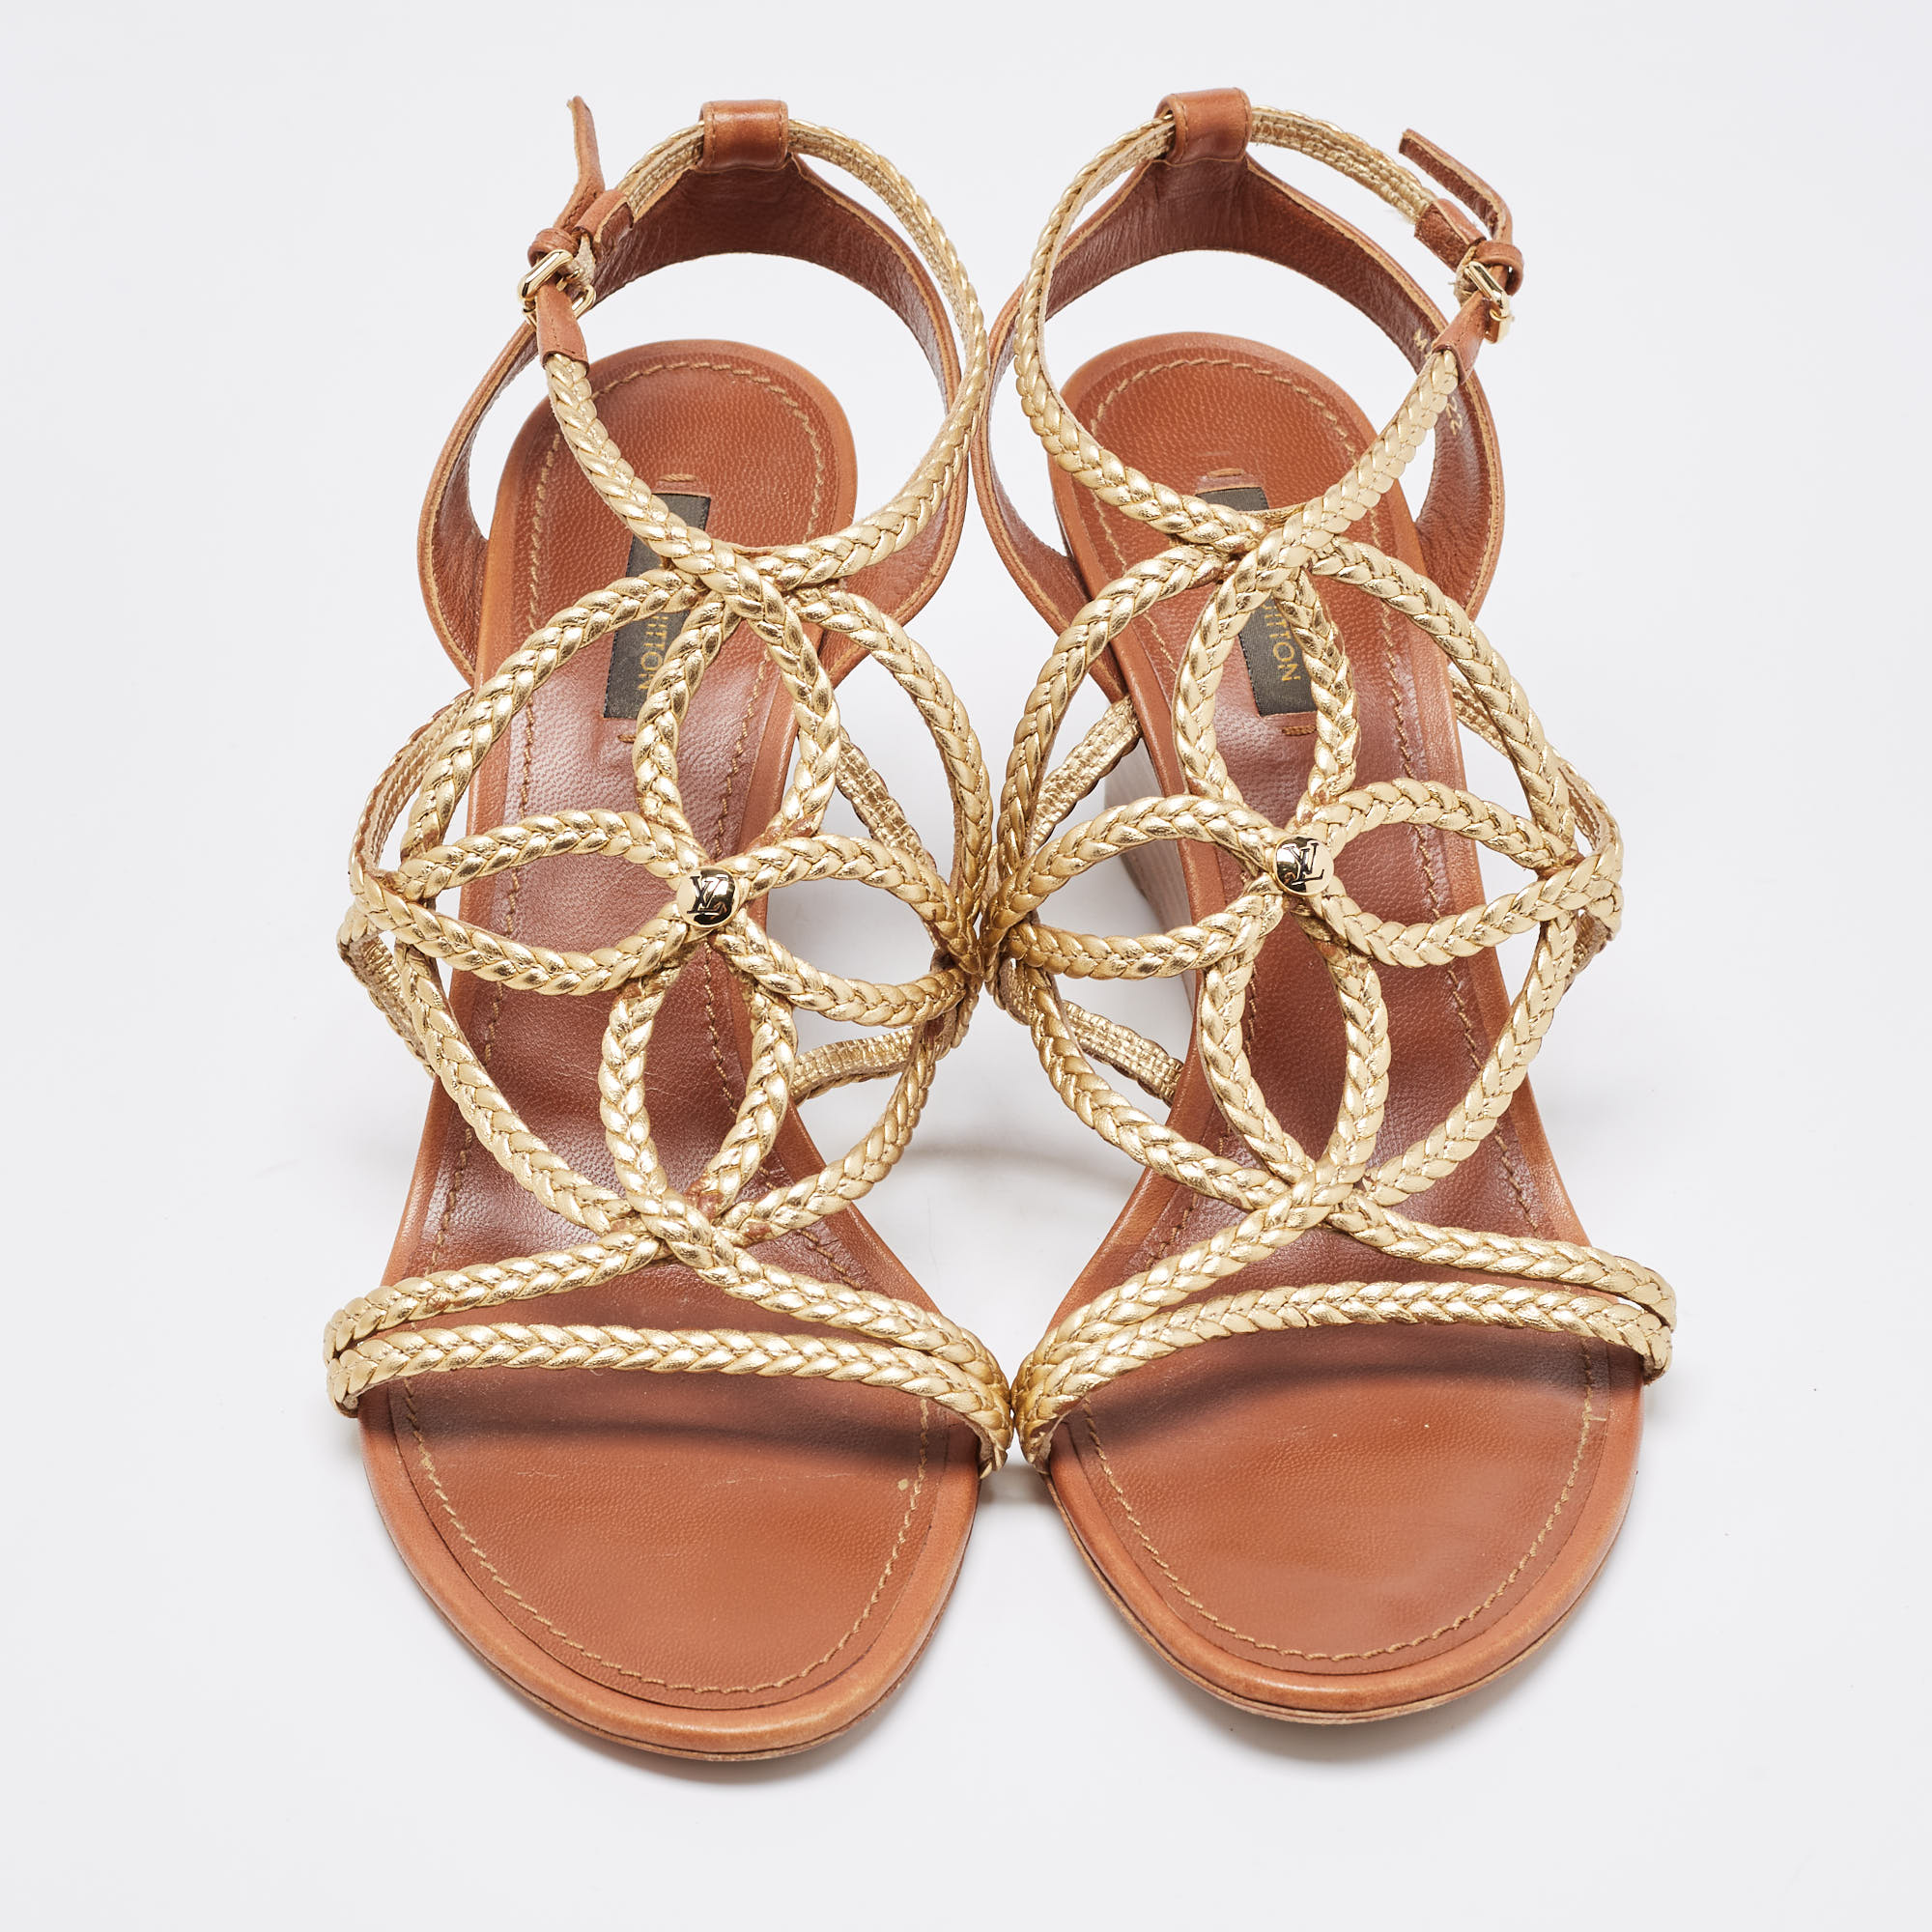 Louis Vuitton Gold/Brown Leather Wedge Sandals Size 40